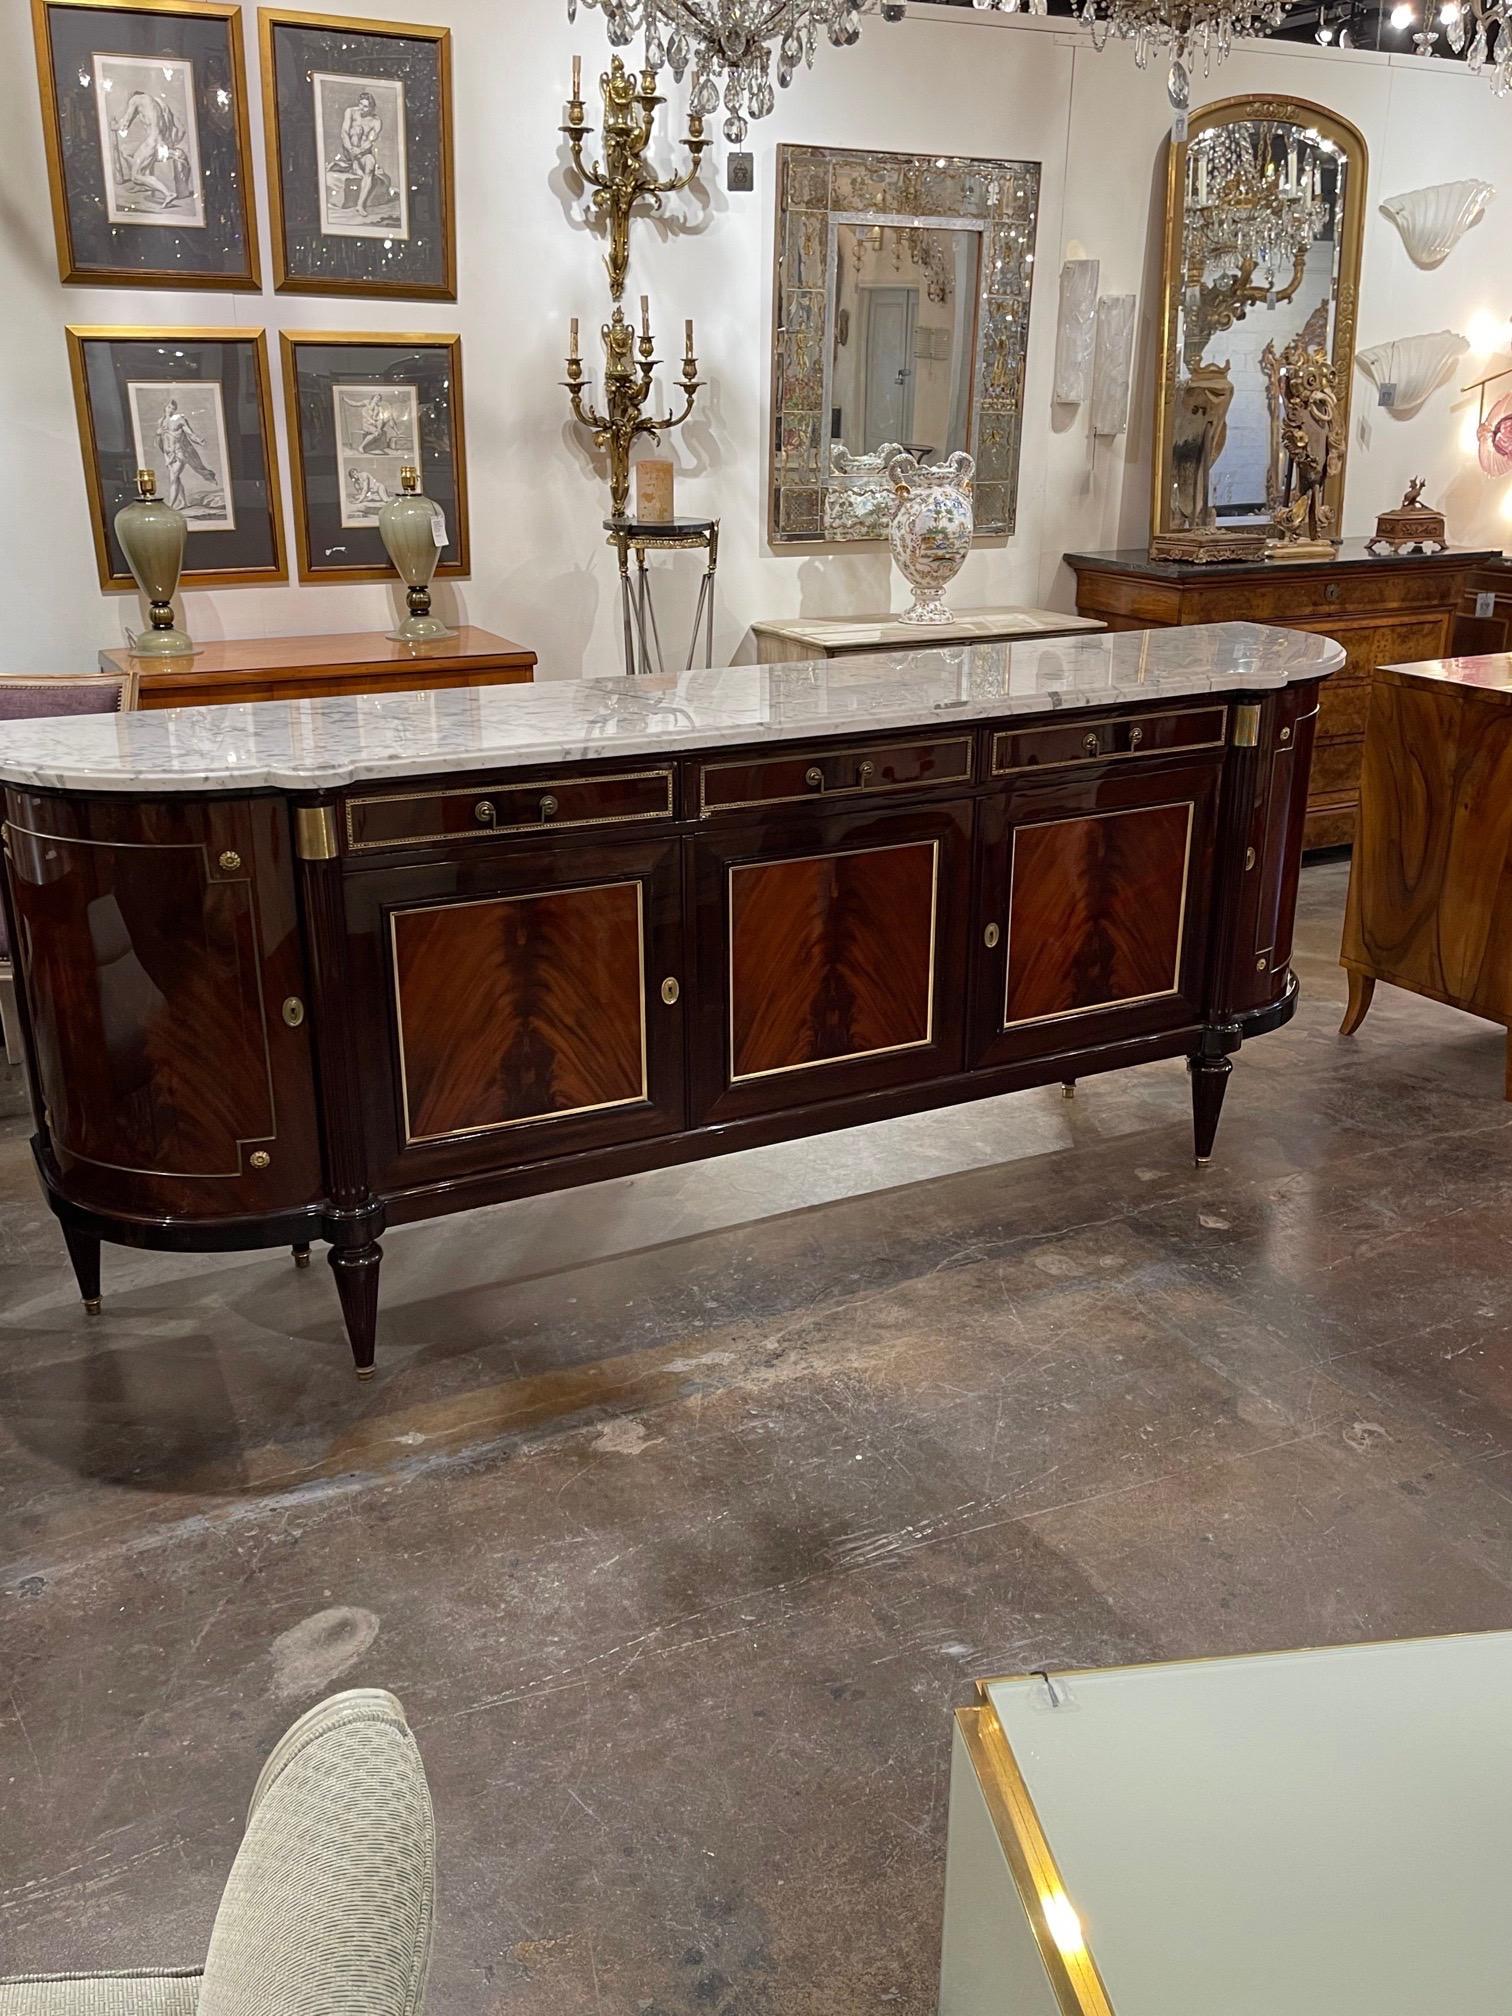 Exceptional French Louis XVI flame mahogany sideboard. The piece has a gorgeous Carrara marble top and decorative brass mounts. So elegant with tons of storage. Amazing!!